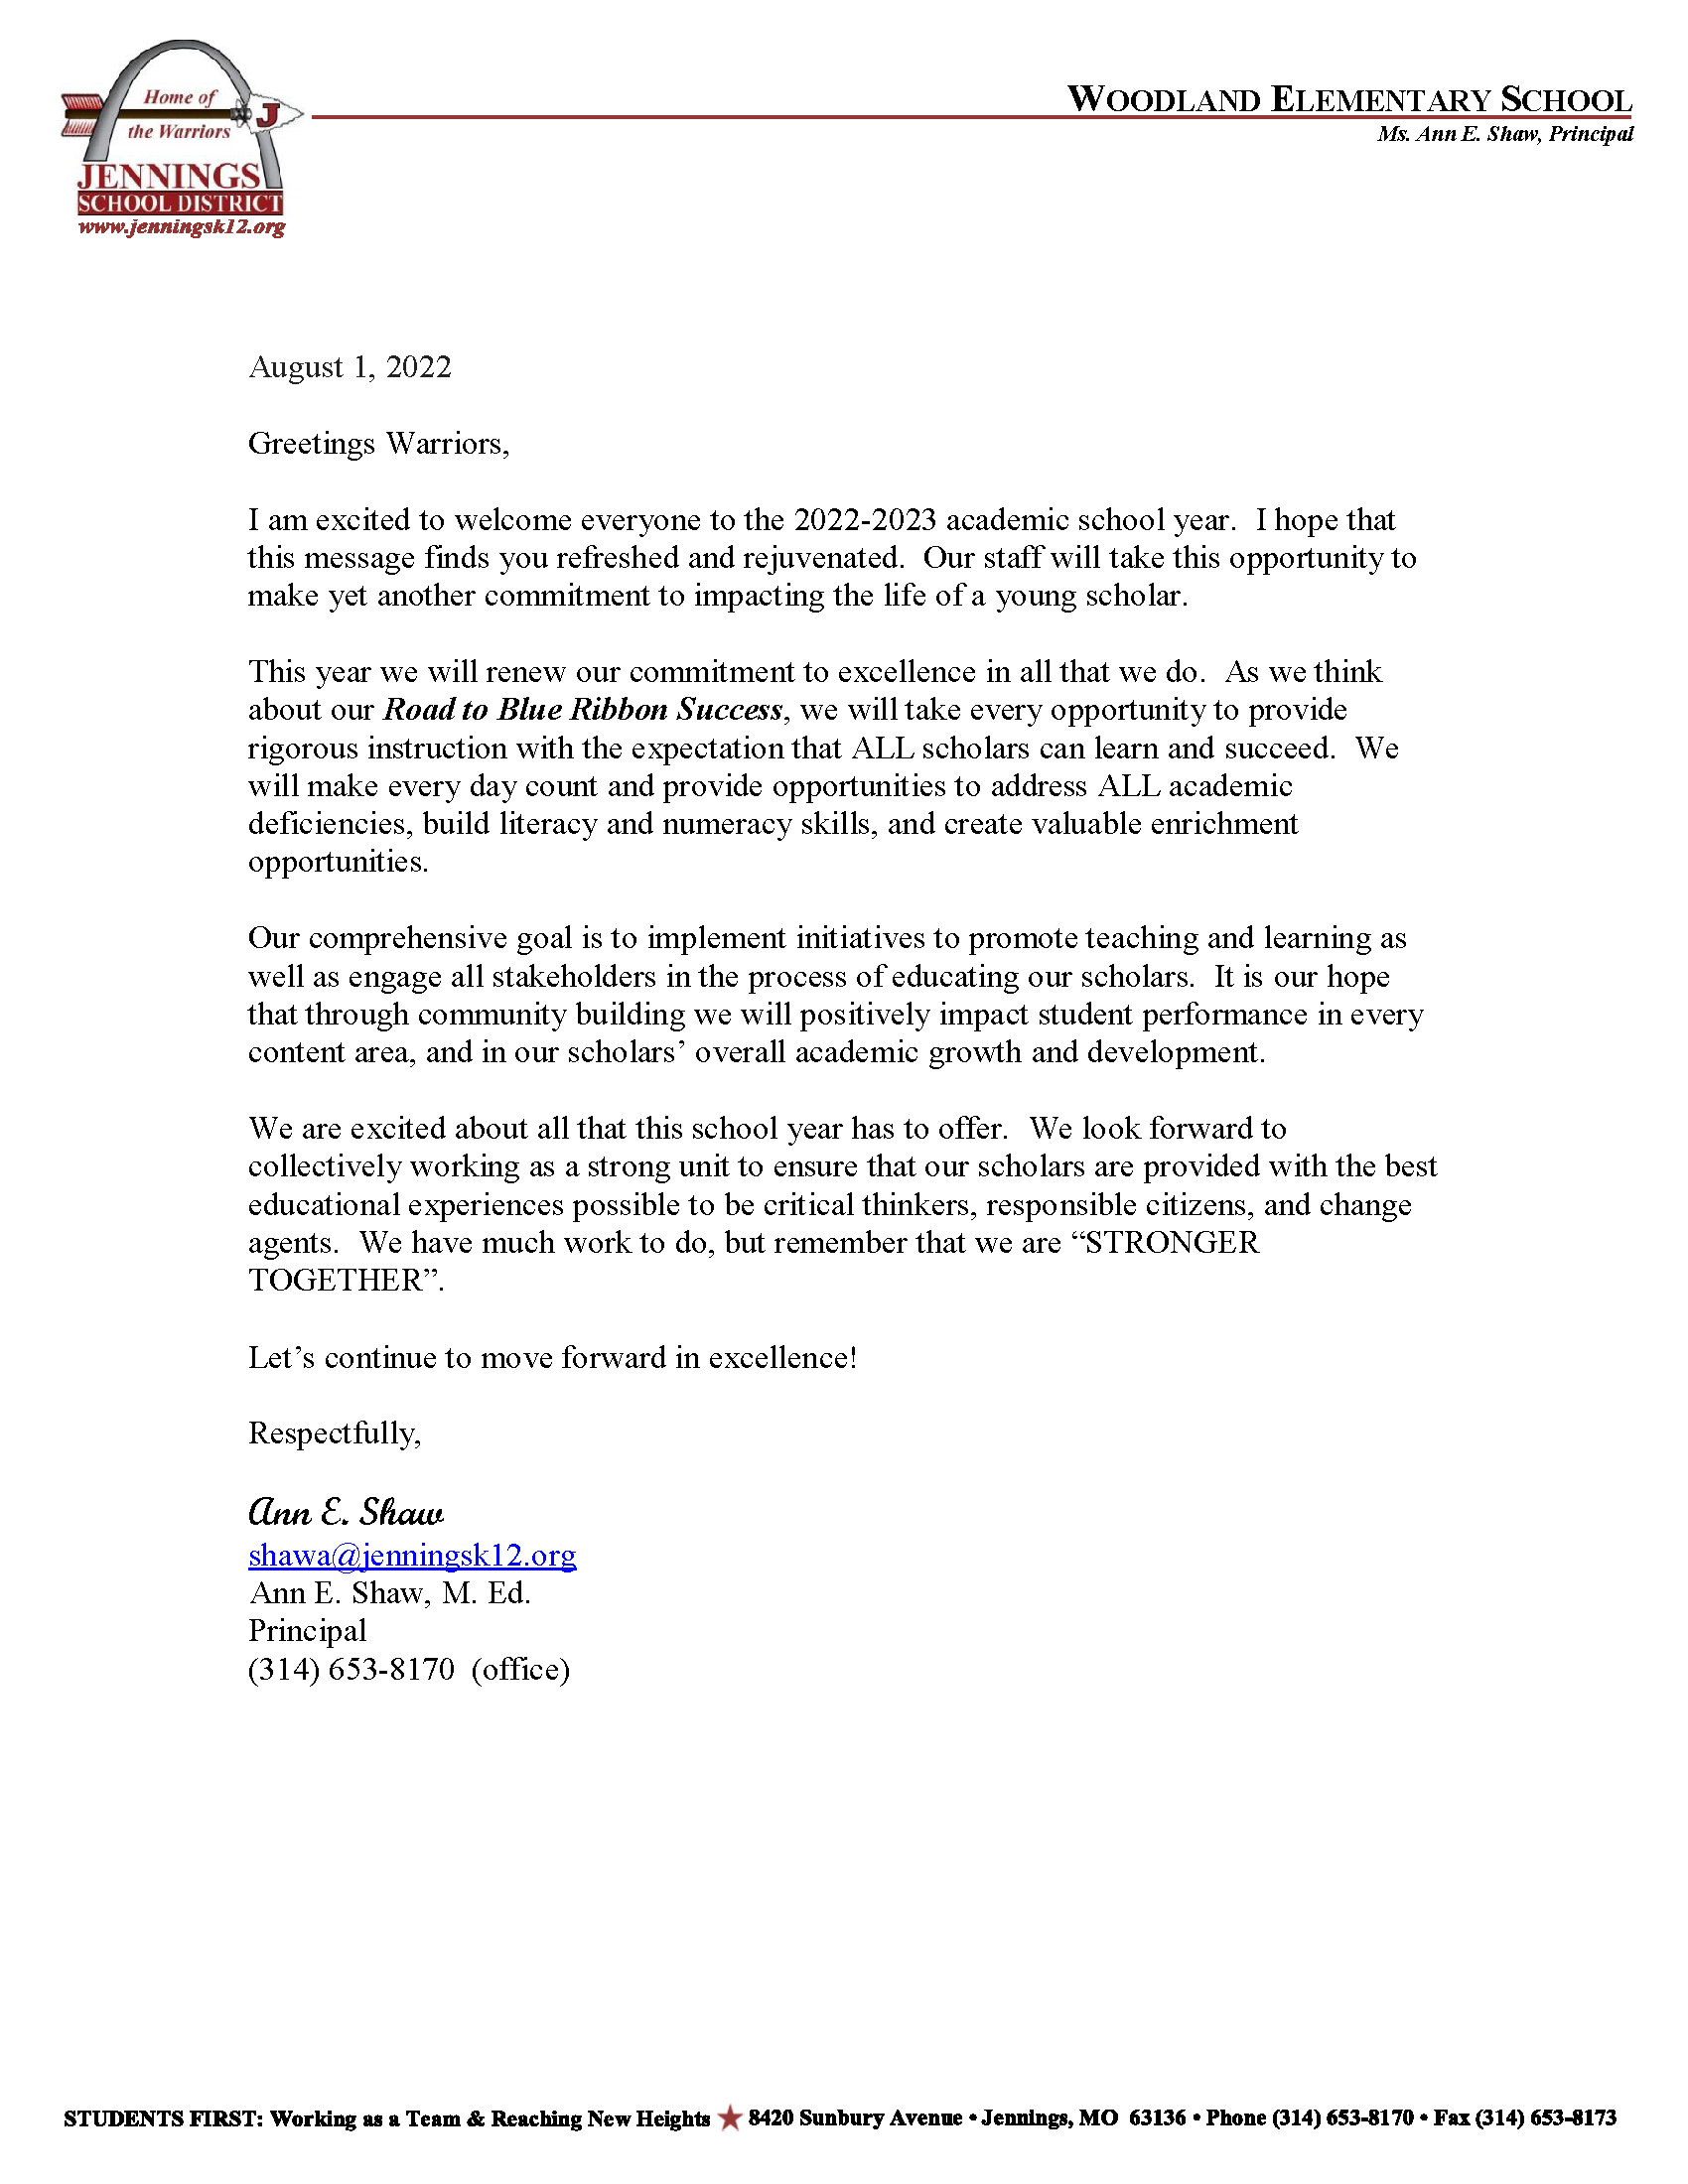 Letter from Principal Shaw welcoming families back to school